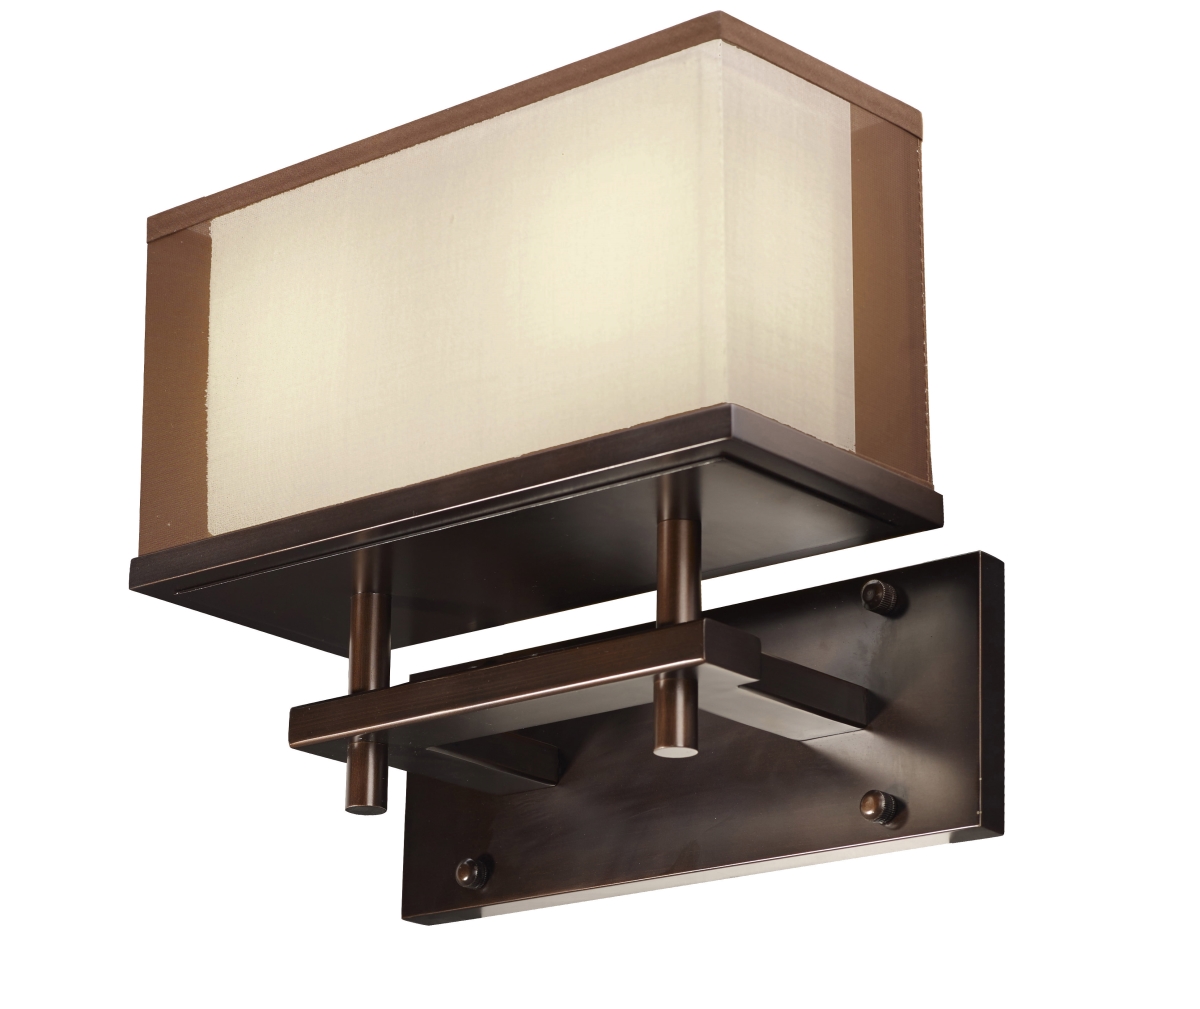 43441csoi 12.25 In. Hennesy Led Wall Sconce - Oil Rubbed Bronze